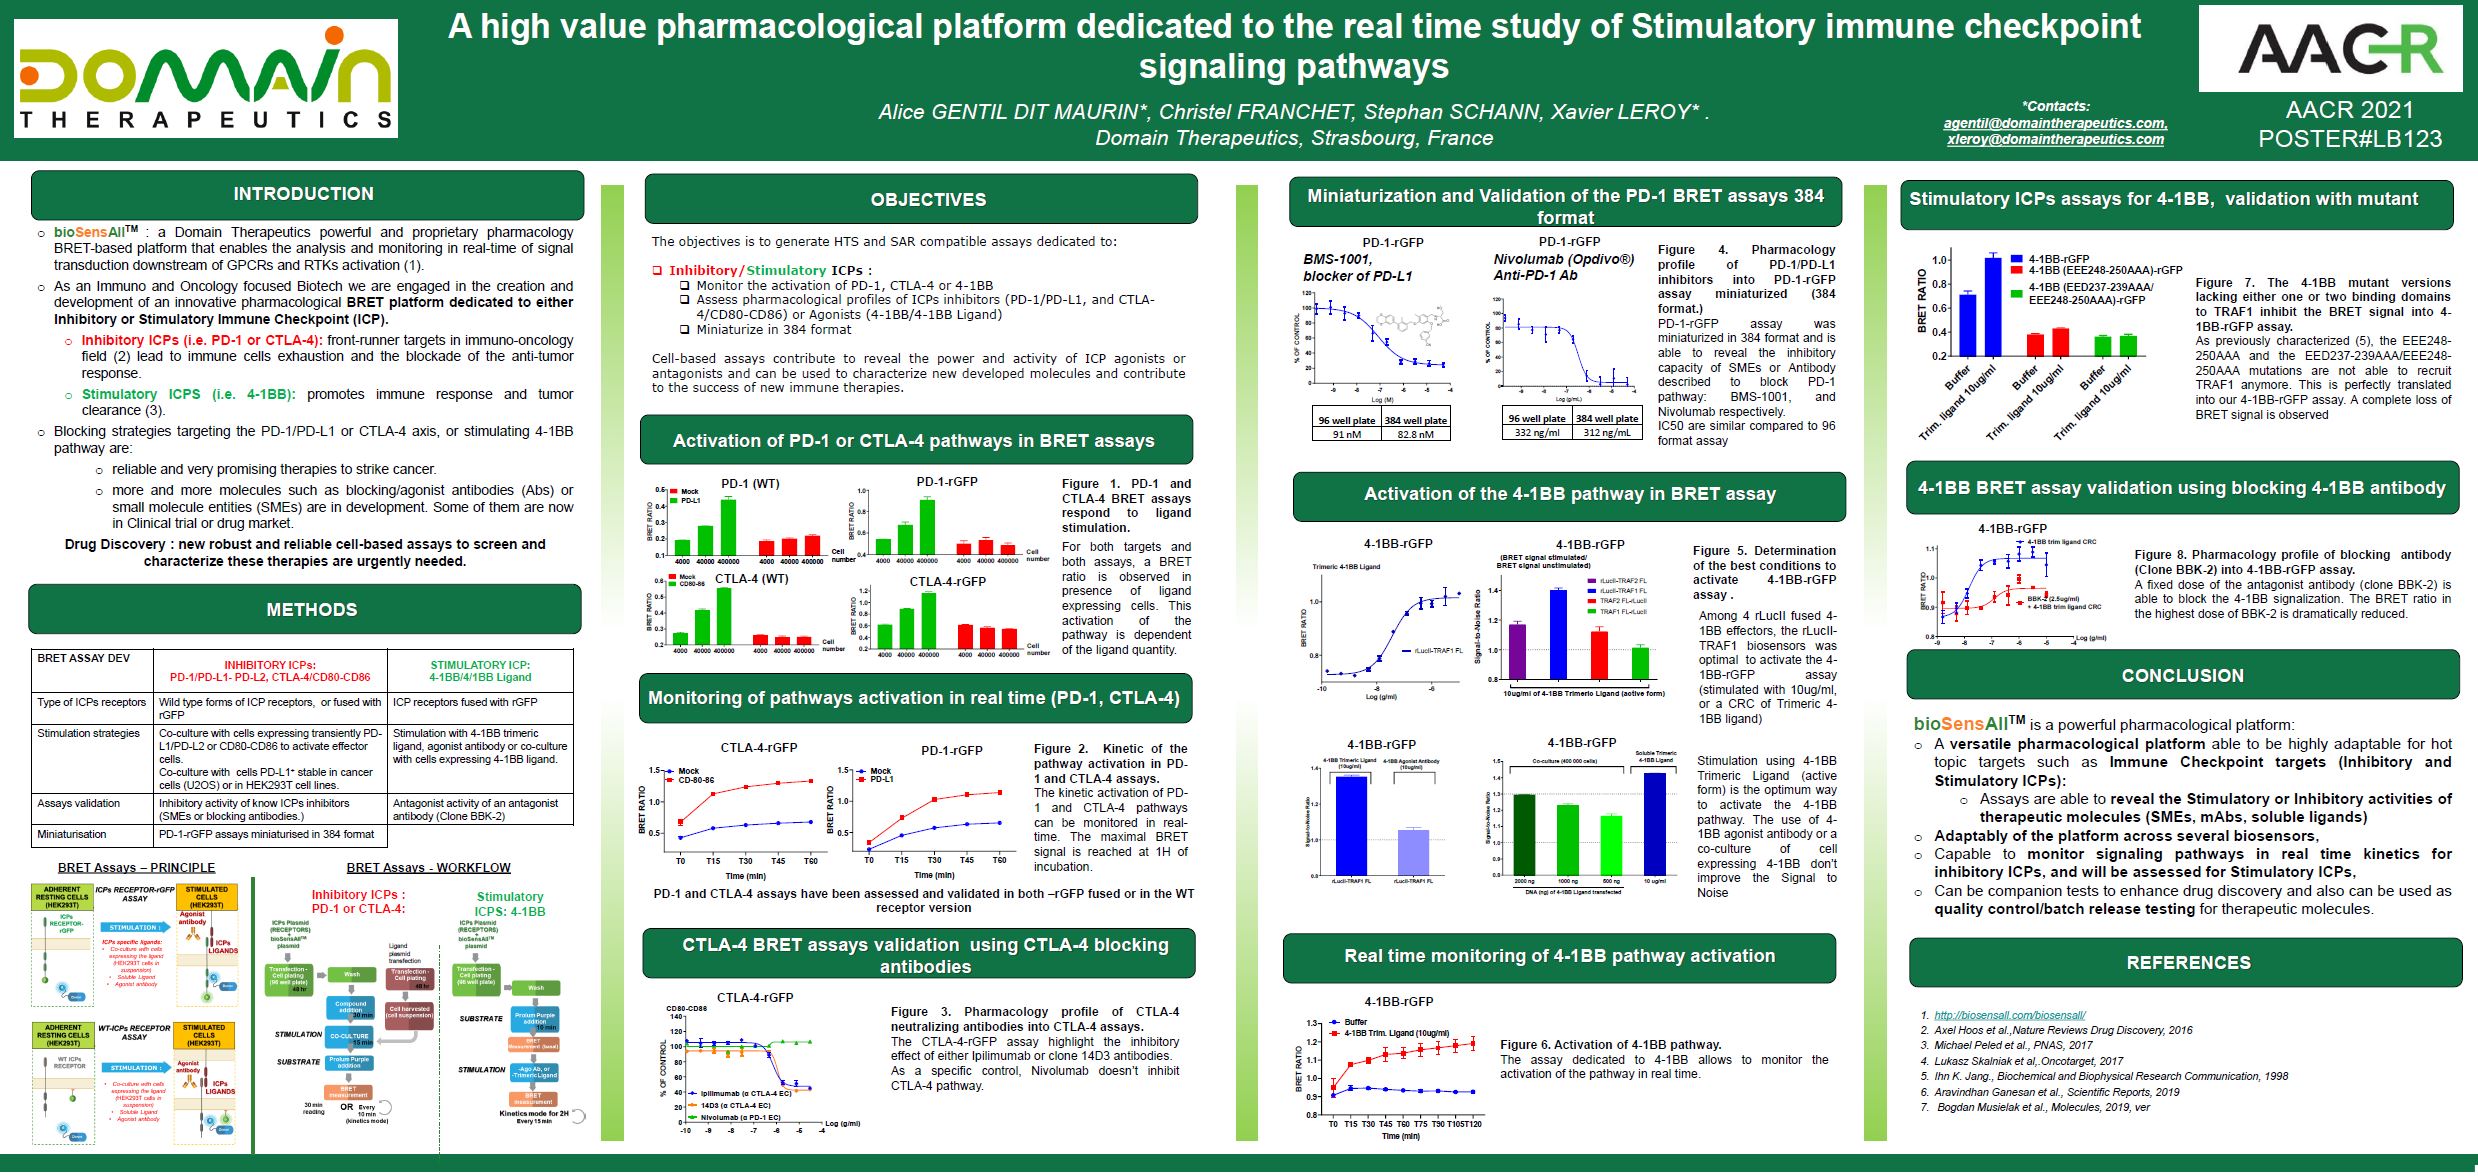 AACR 2021: A high value pharmacological platform dedicated to the real time study of stimulatory immune checkpoint signaling pathways